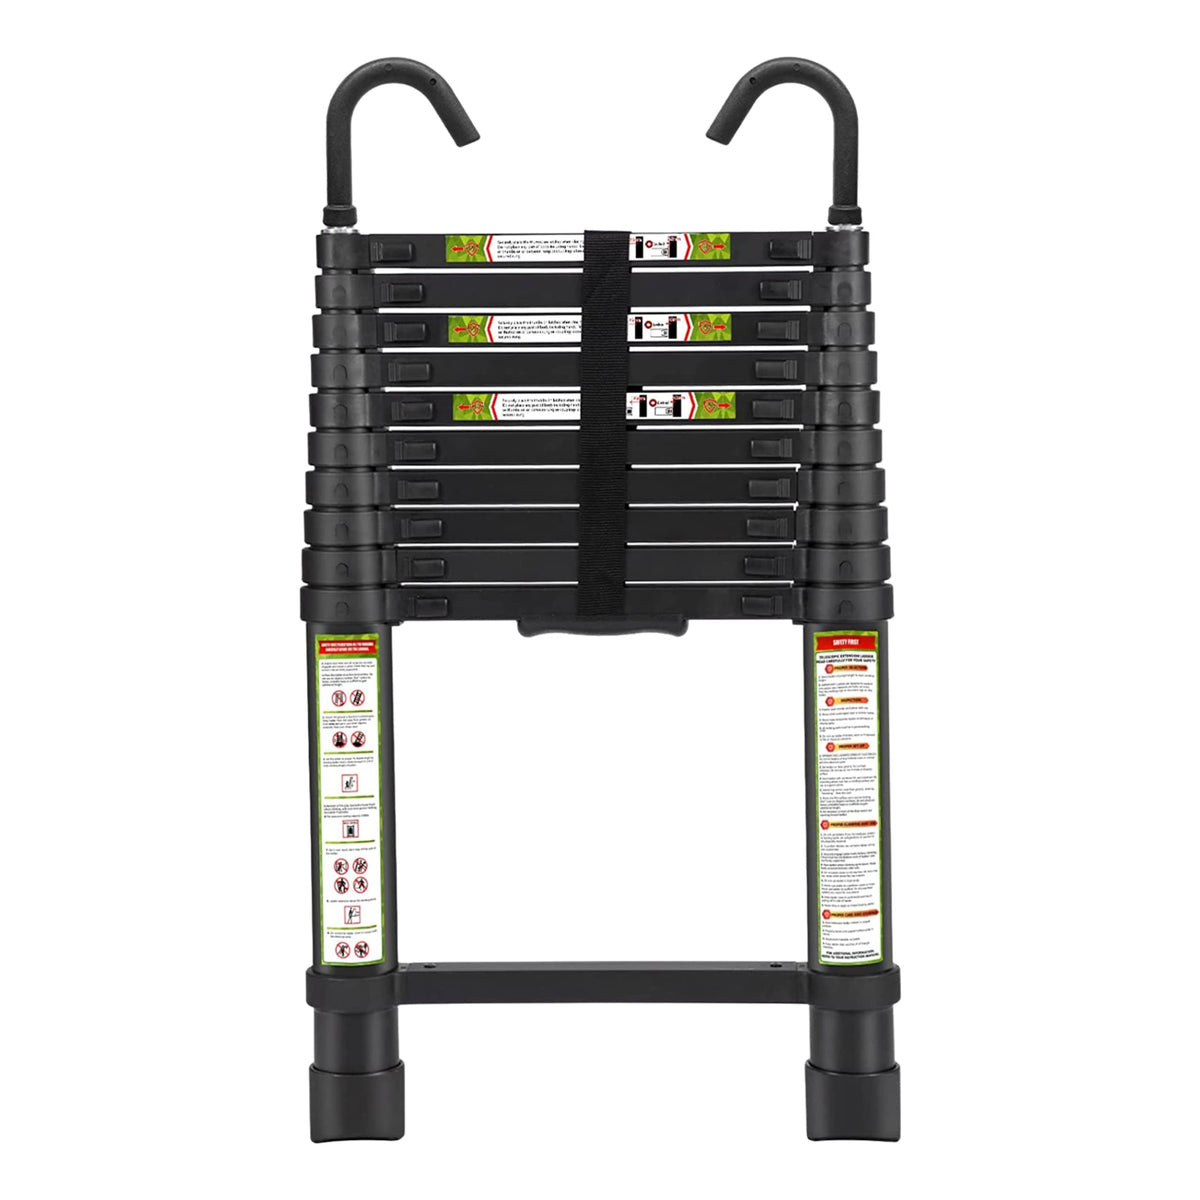 Plantex Heavy-Duty Black Aluminum Extension Telescopic Ladder with Hooks/Portable and Compact Foldable Ladder-EN131 Certified (4.4Meter/14.5 Feet)